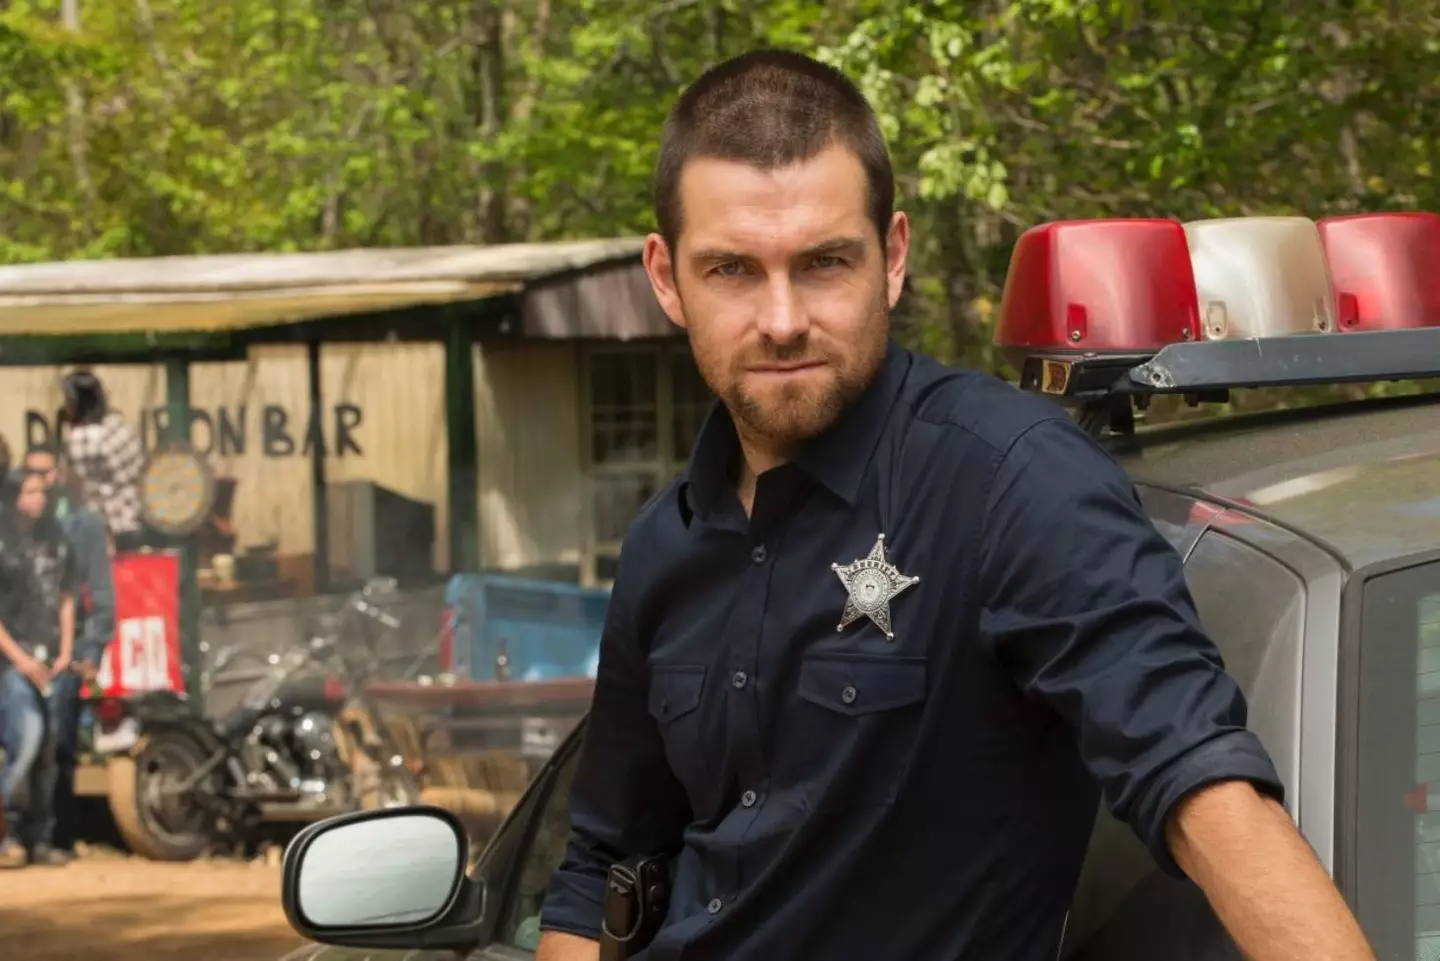 Kiwi actor Antony Starr plays an ex-con who assumes the identity of a sheriff.